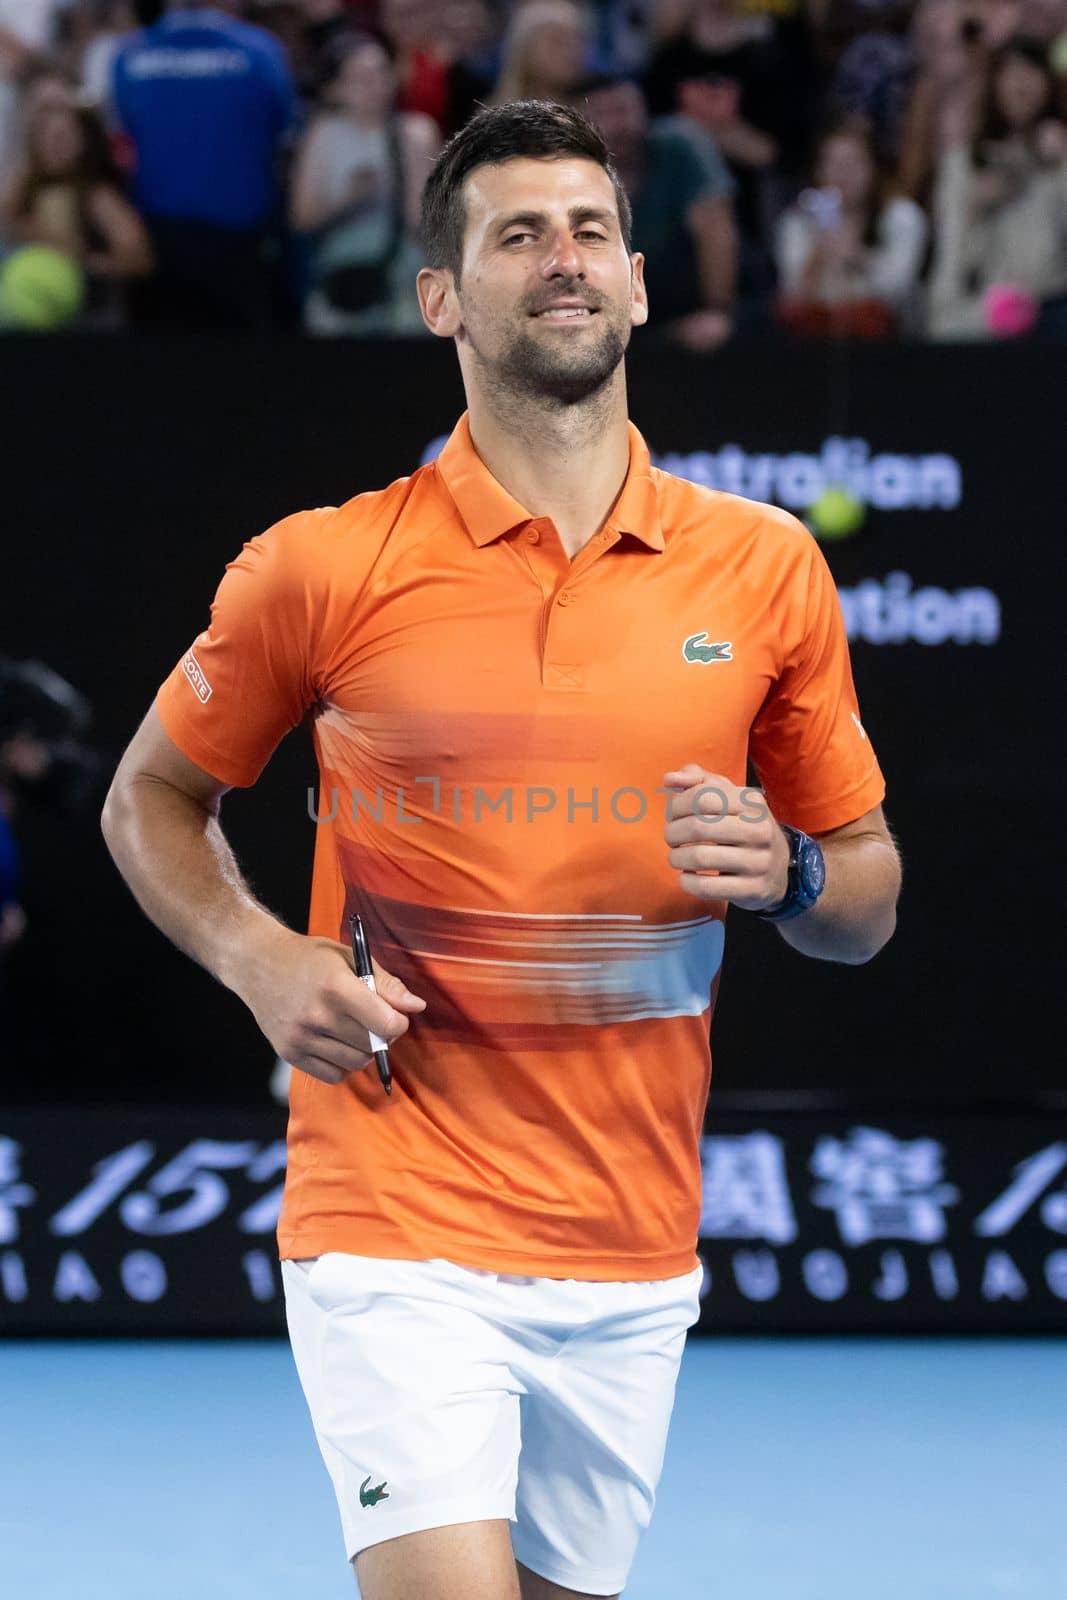 MELBOURNE, AUSTRALIA - JANUARY 13: Novak Djokovic of Serbia signs autographs after playing Nick Kyrgios of Australia in a showdown charity match ahead of the 2023 Australian Open at Melbourne Park on January 13, 2023 in Melbourne, Australia.